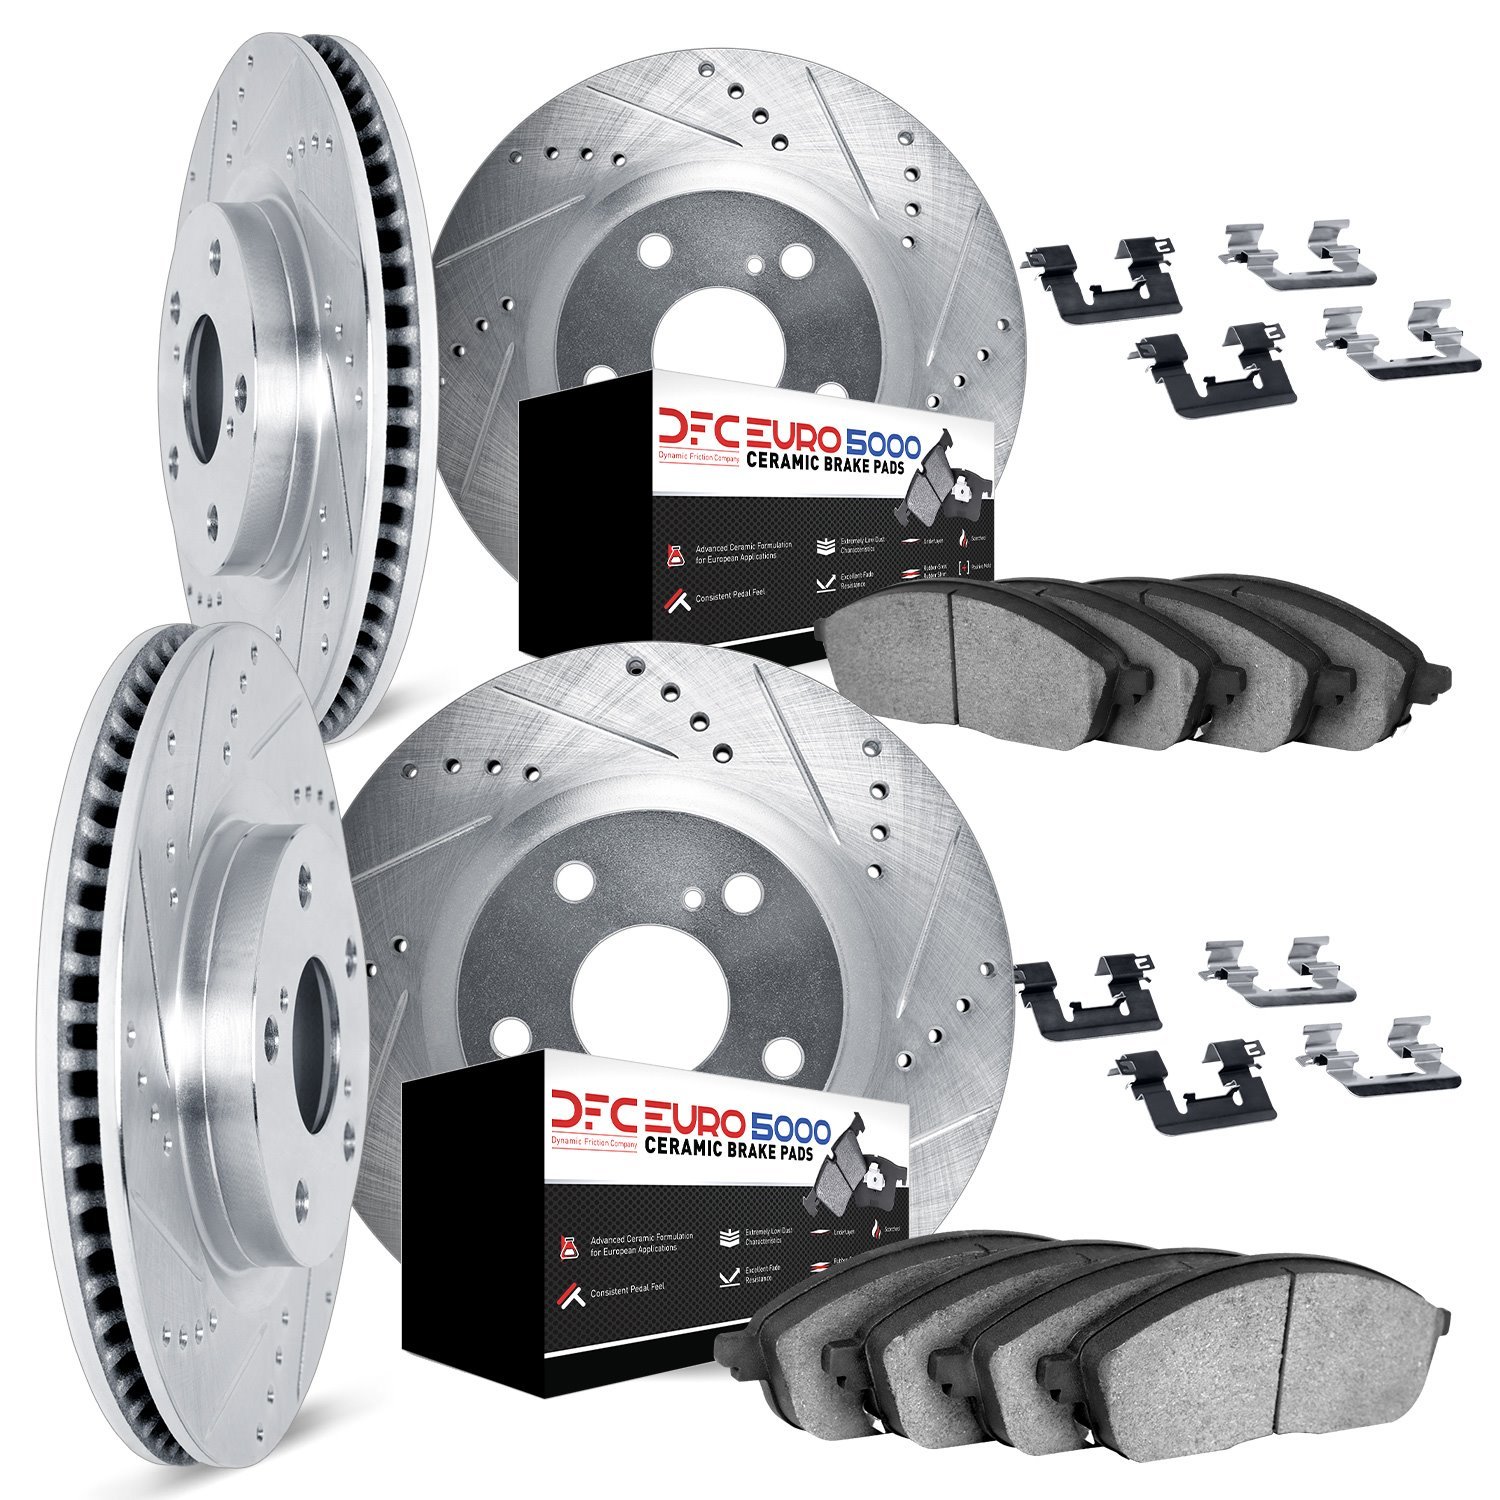 7614-31035 Drilled/Slotted Brake Rotors w/5000 Euro Ceramic Brake Pads Kit & Hardware [Silver], 2007-2019 BMW, Position: Front a